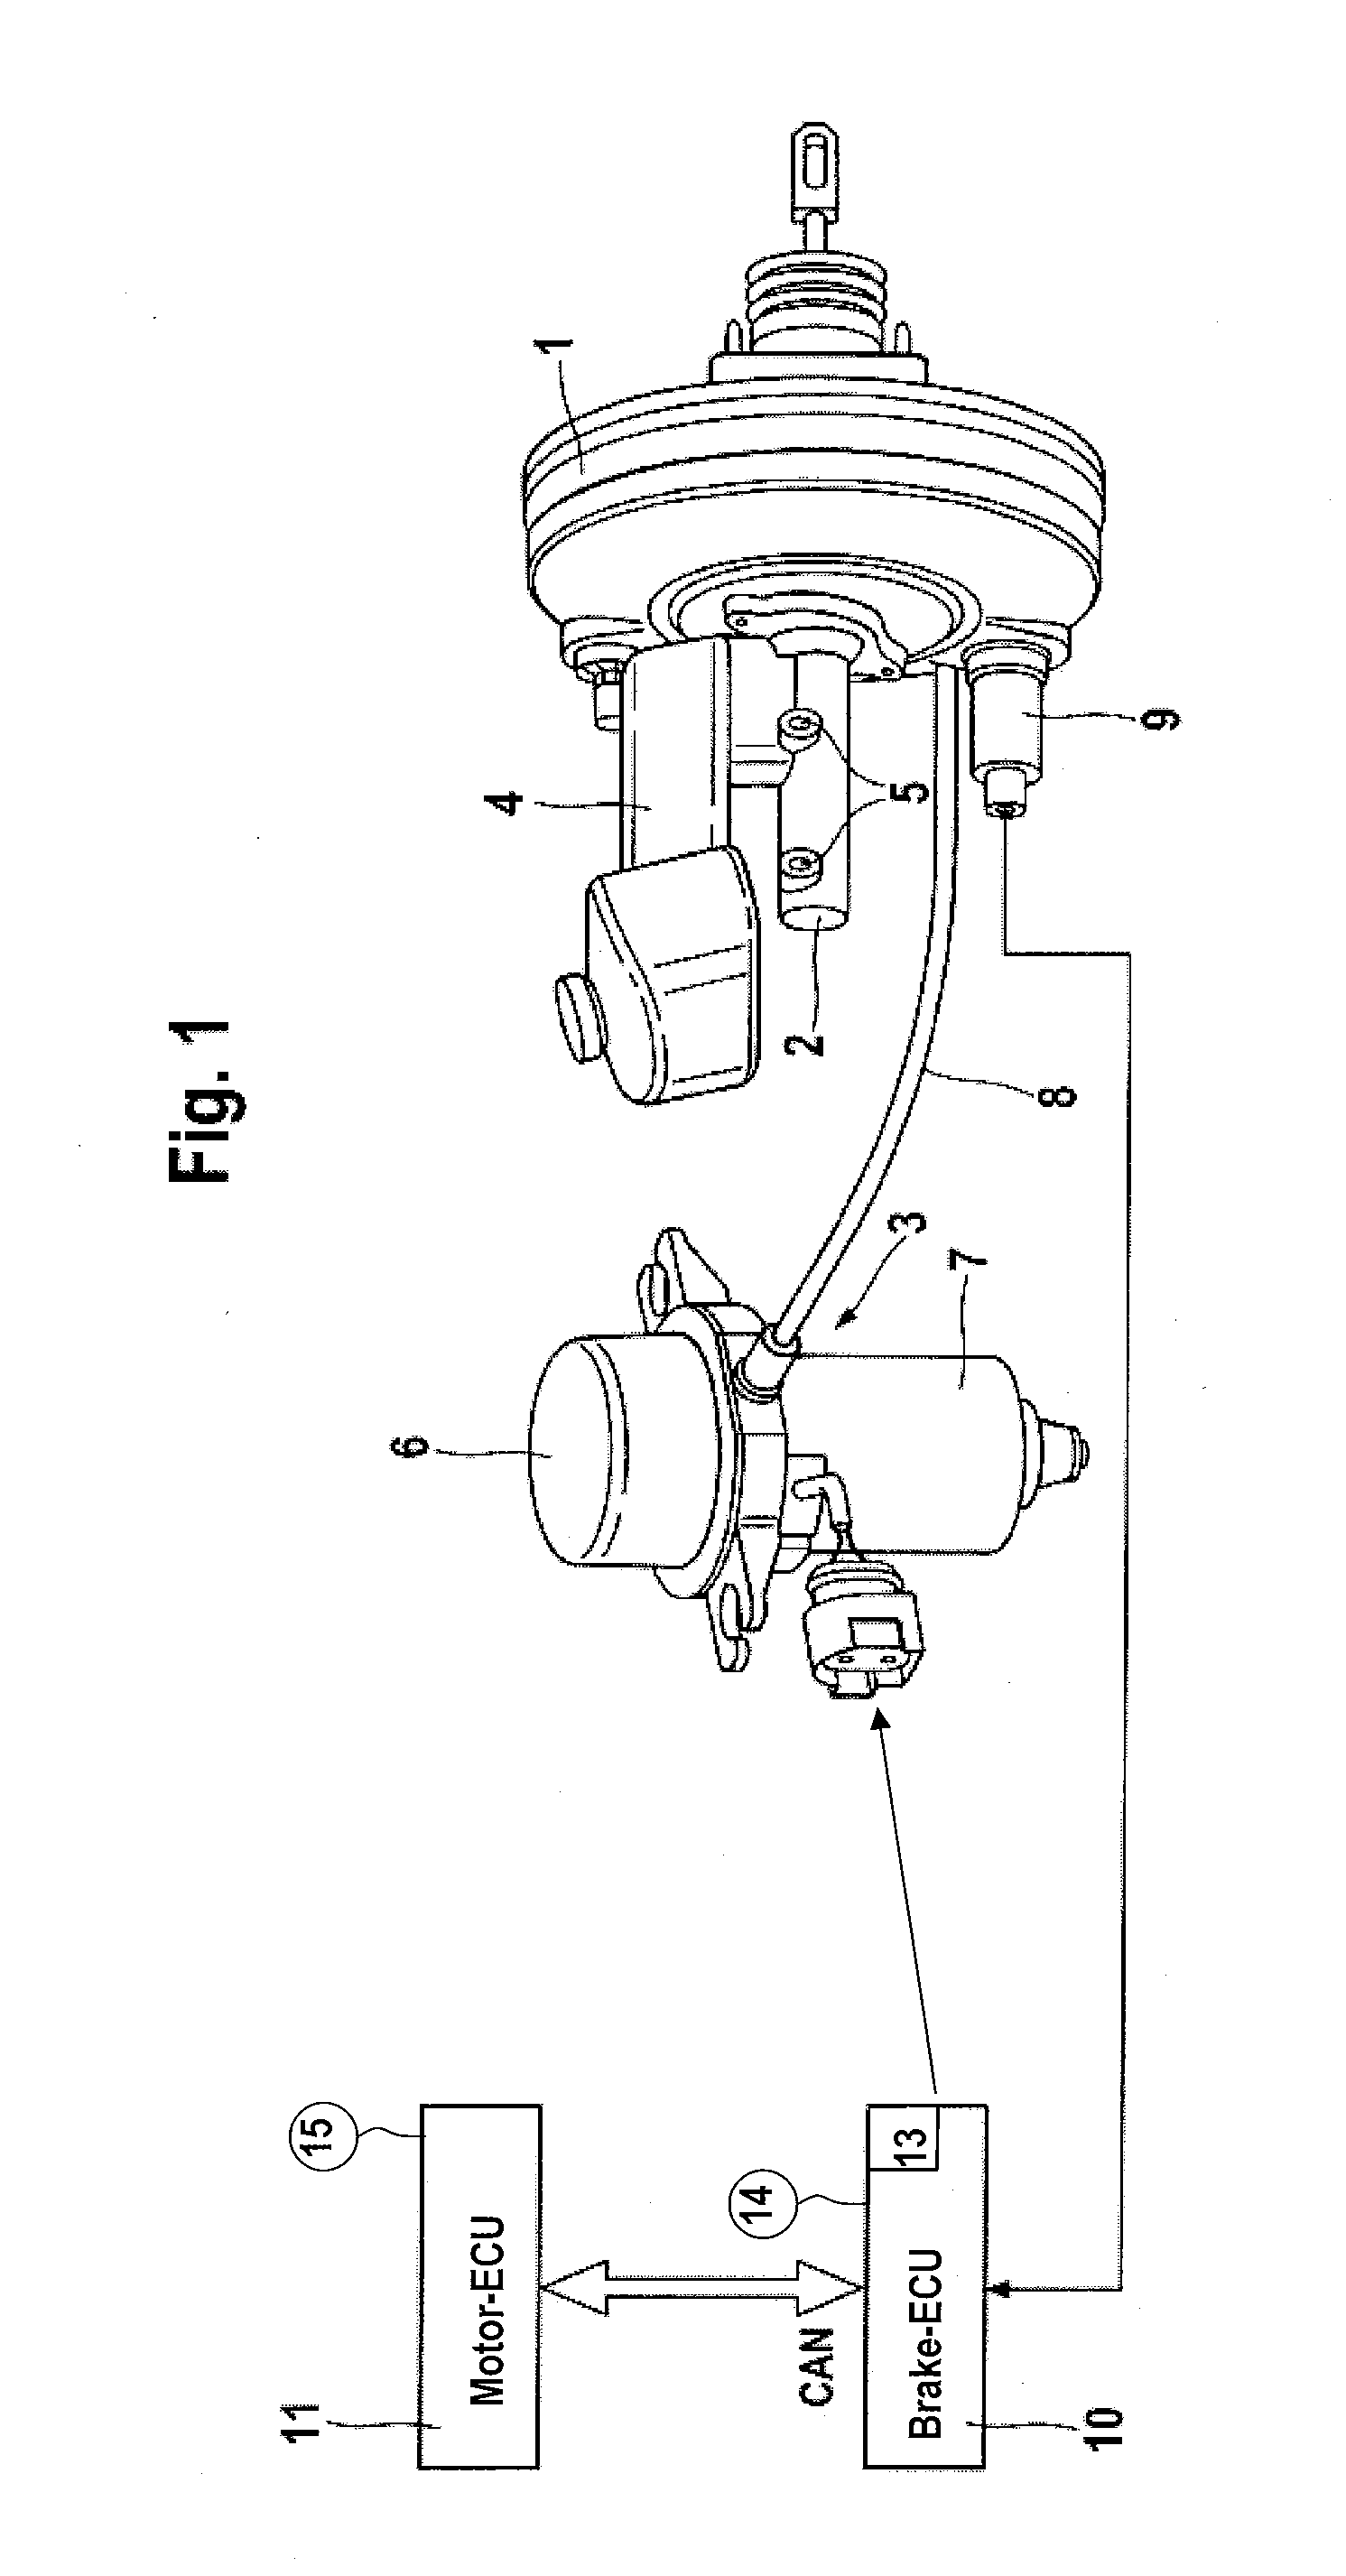 Device for supplying pressure to an actuation unit of a motor vehicle brake system and method for controlling said device